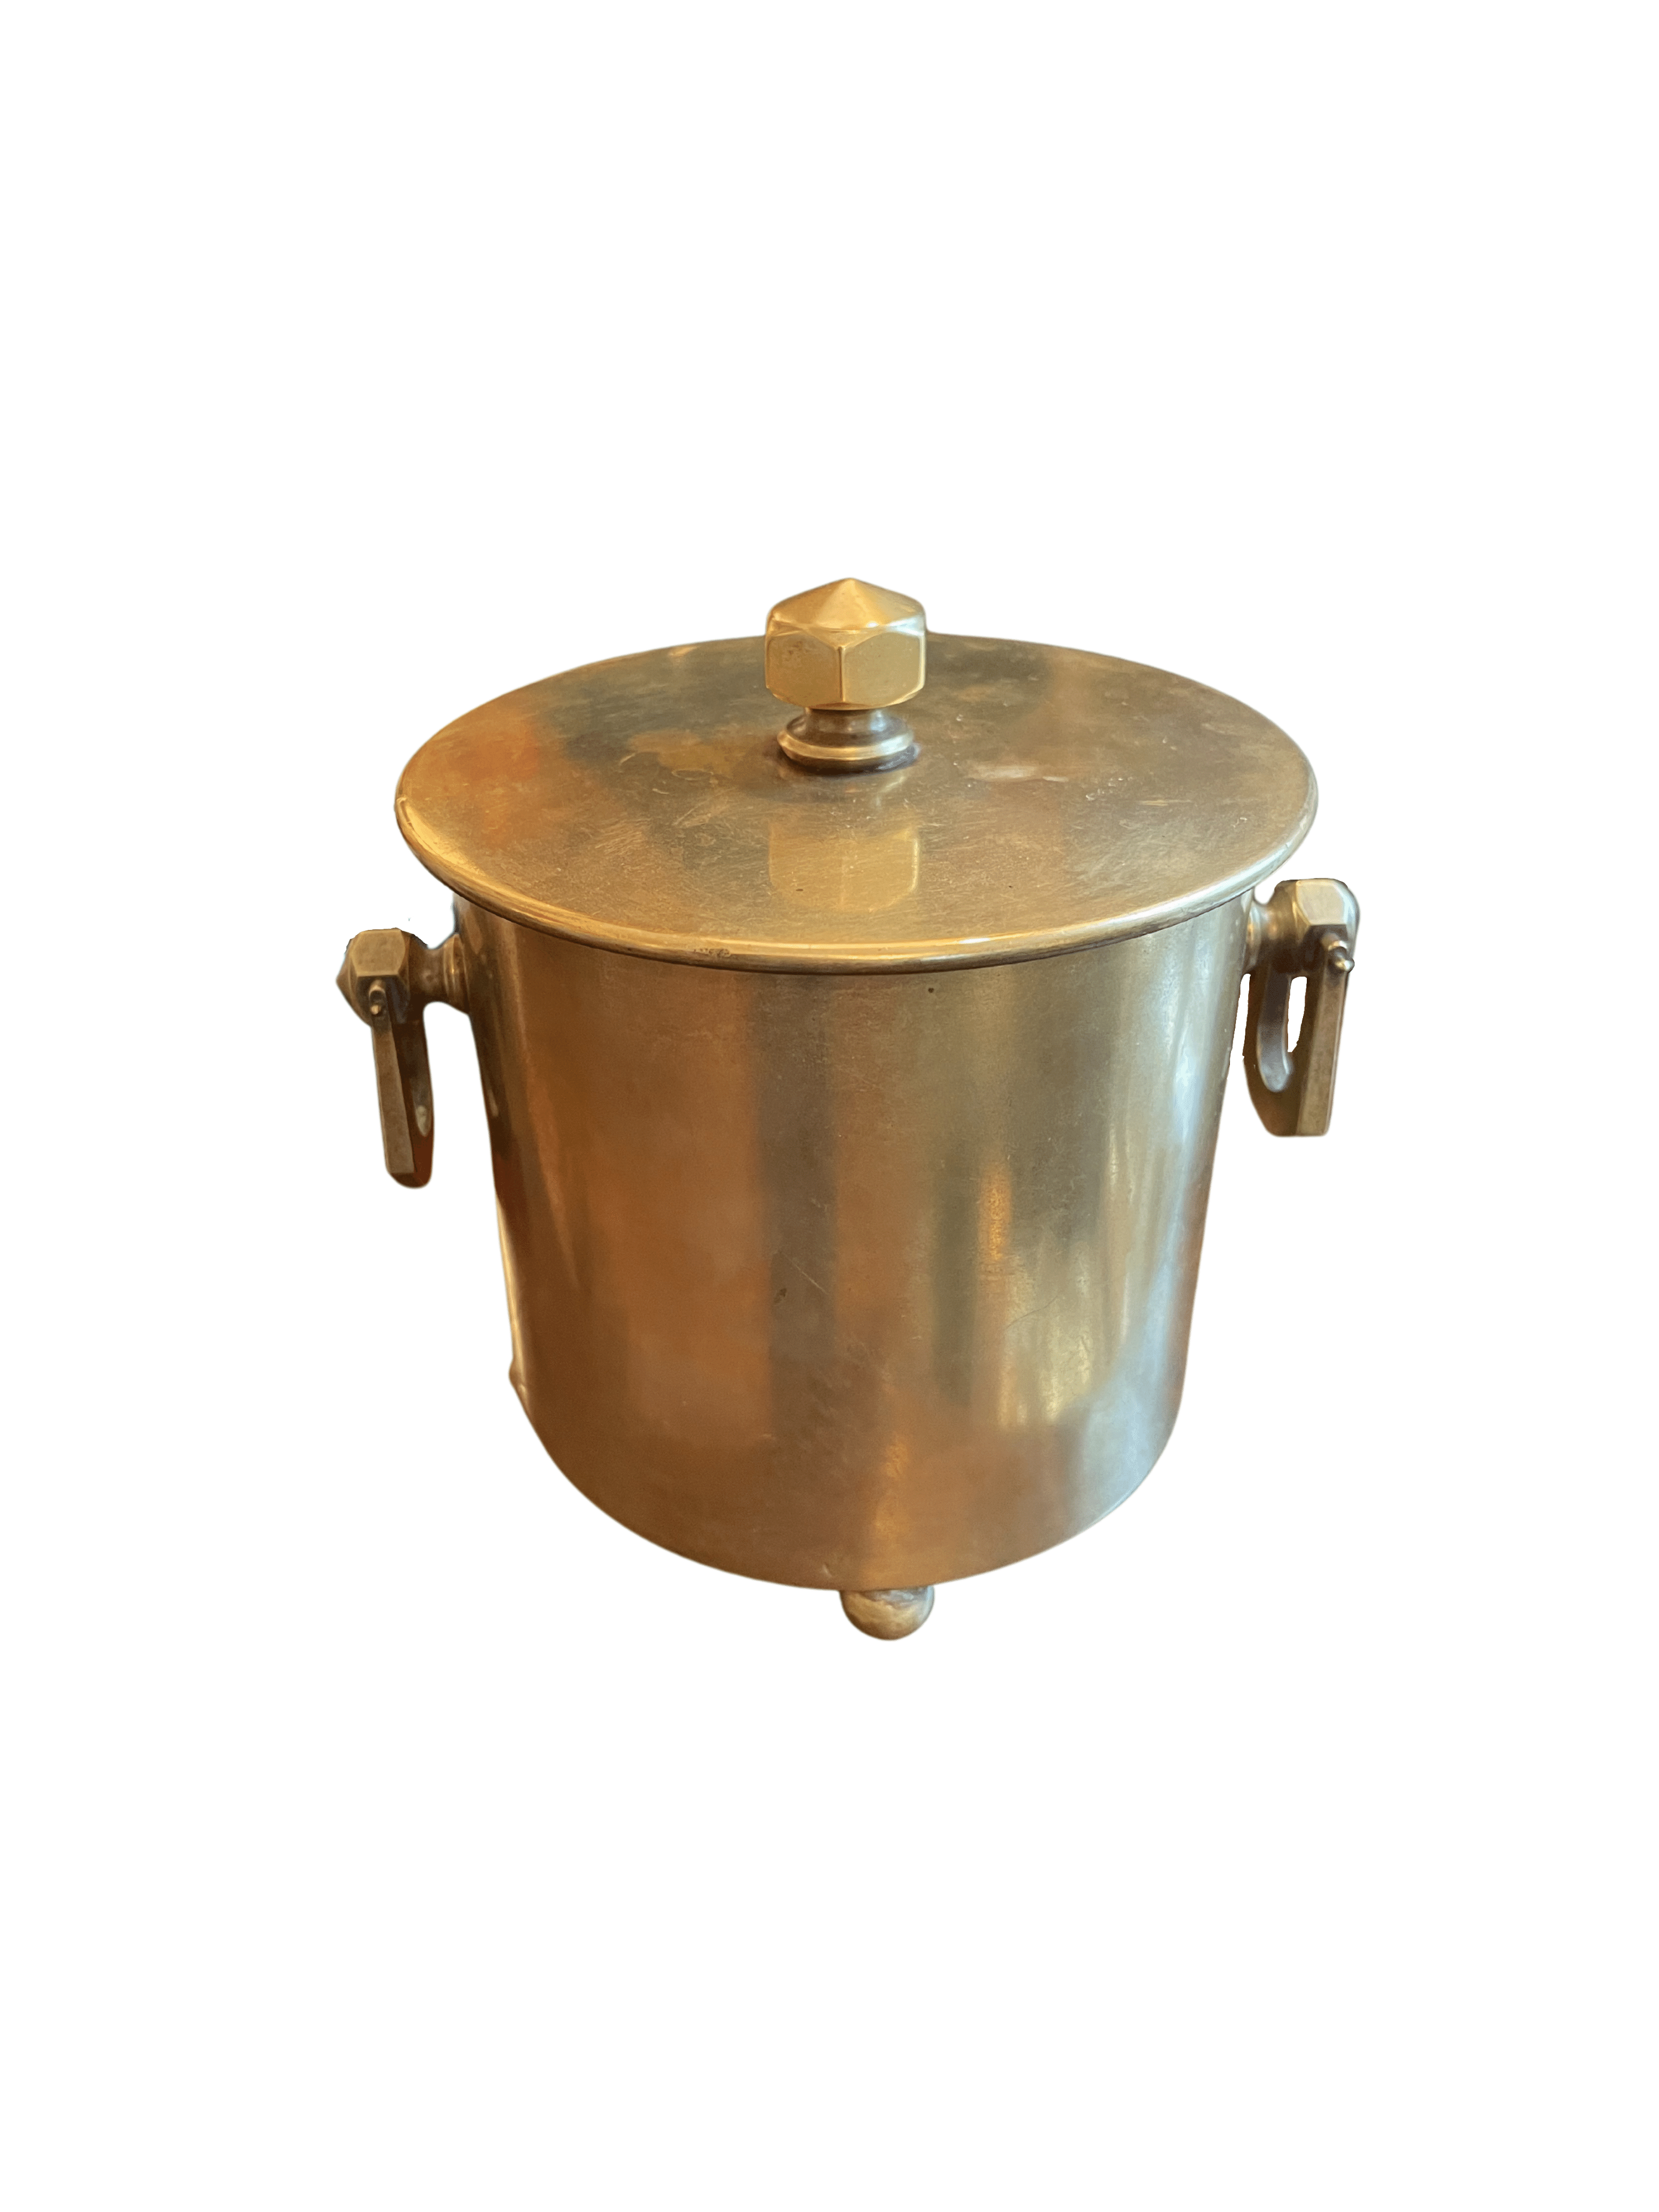 Vintage Brass Tea Caddy With Copper Lining